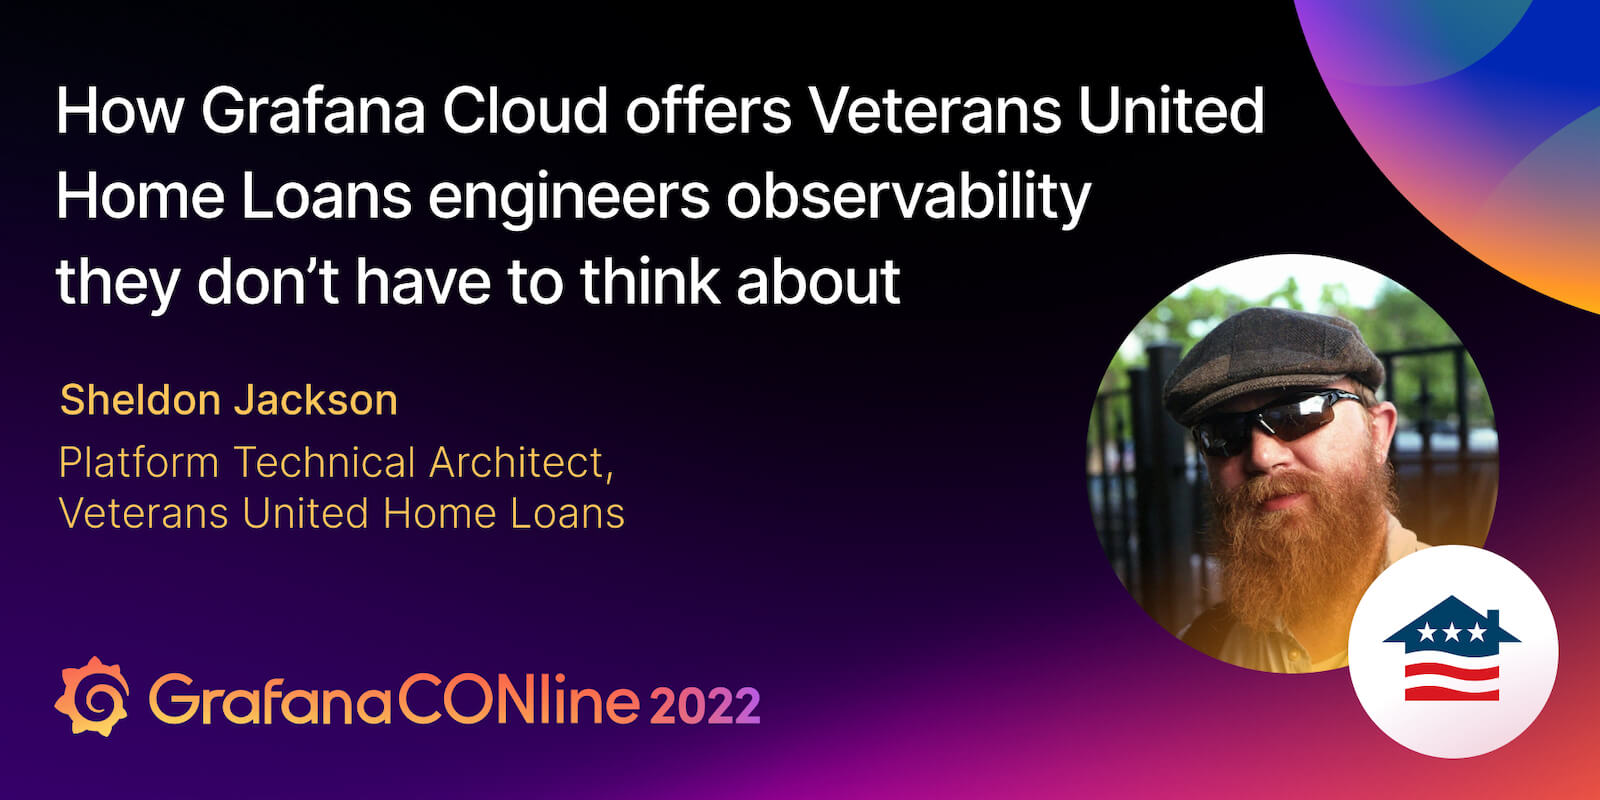 How Grafana Cloud offers Veterans United Home Loans engineers observability they don’t have to think about